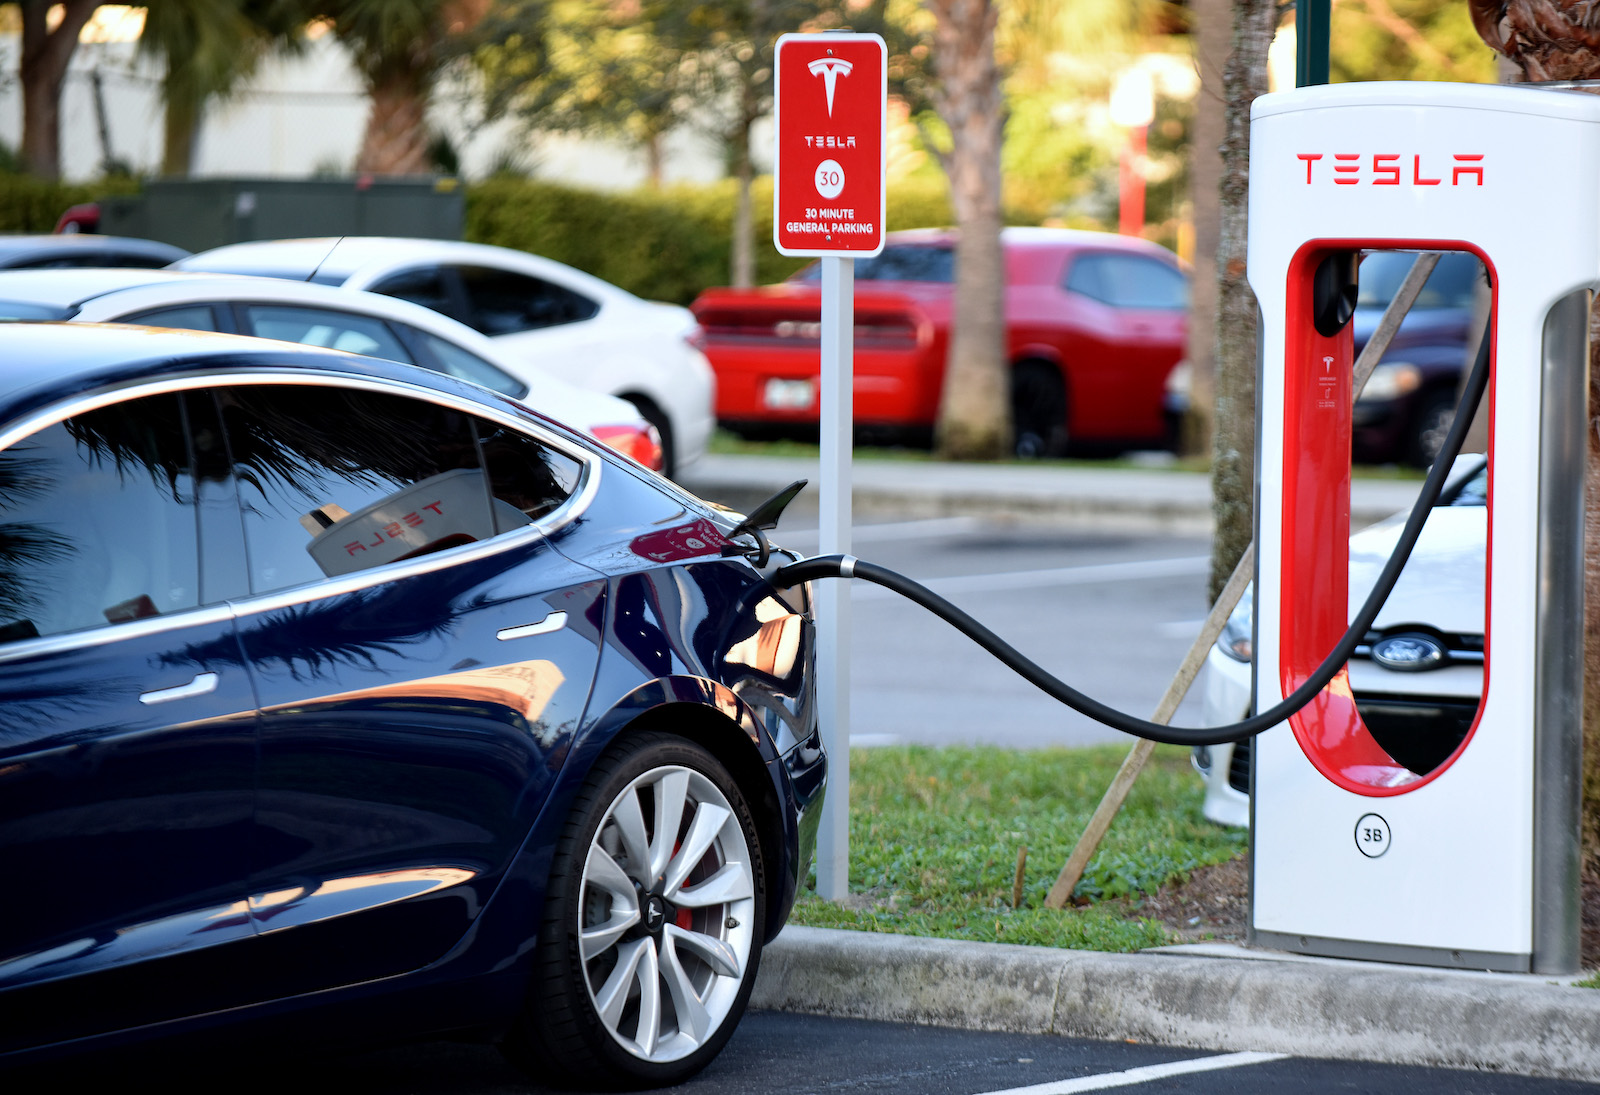 January 20, 2019 - Altamonte Springs, Florida, United States - A Tesla electric car is seen parked at a charging station in Altamonte Springs, Florida on January 20, 2019. Tesla has raised prices at its Supercharger stations, and will now set prices according to local demand and power rates. 


 (Photo by Paul Hennessy/NurPhoto via Getty Images)